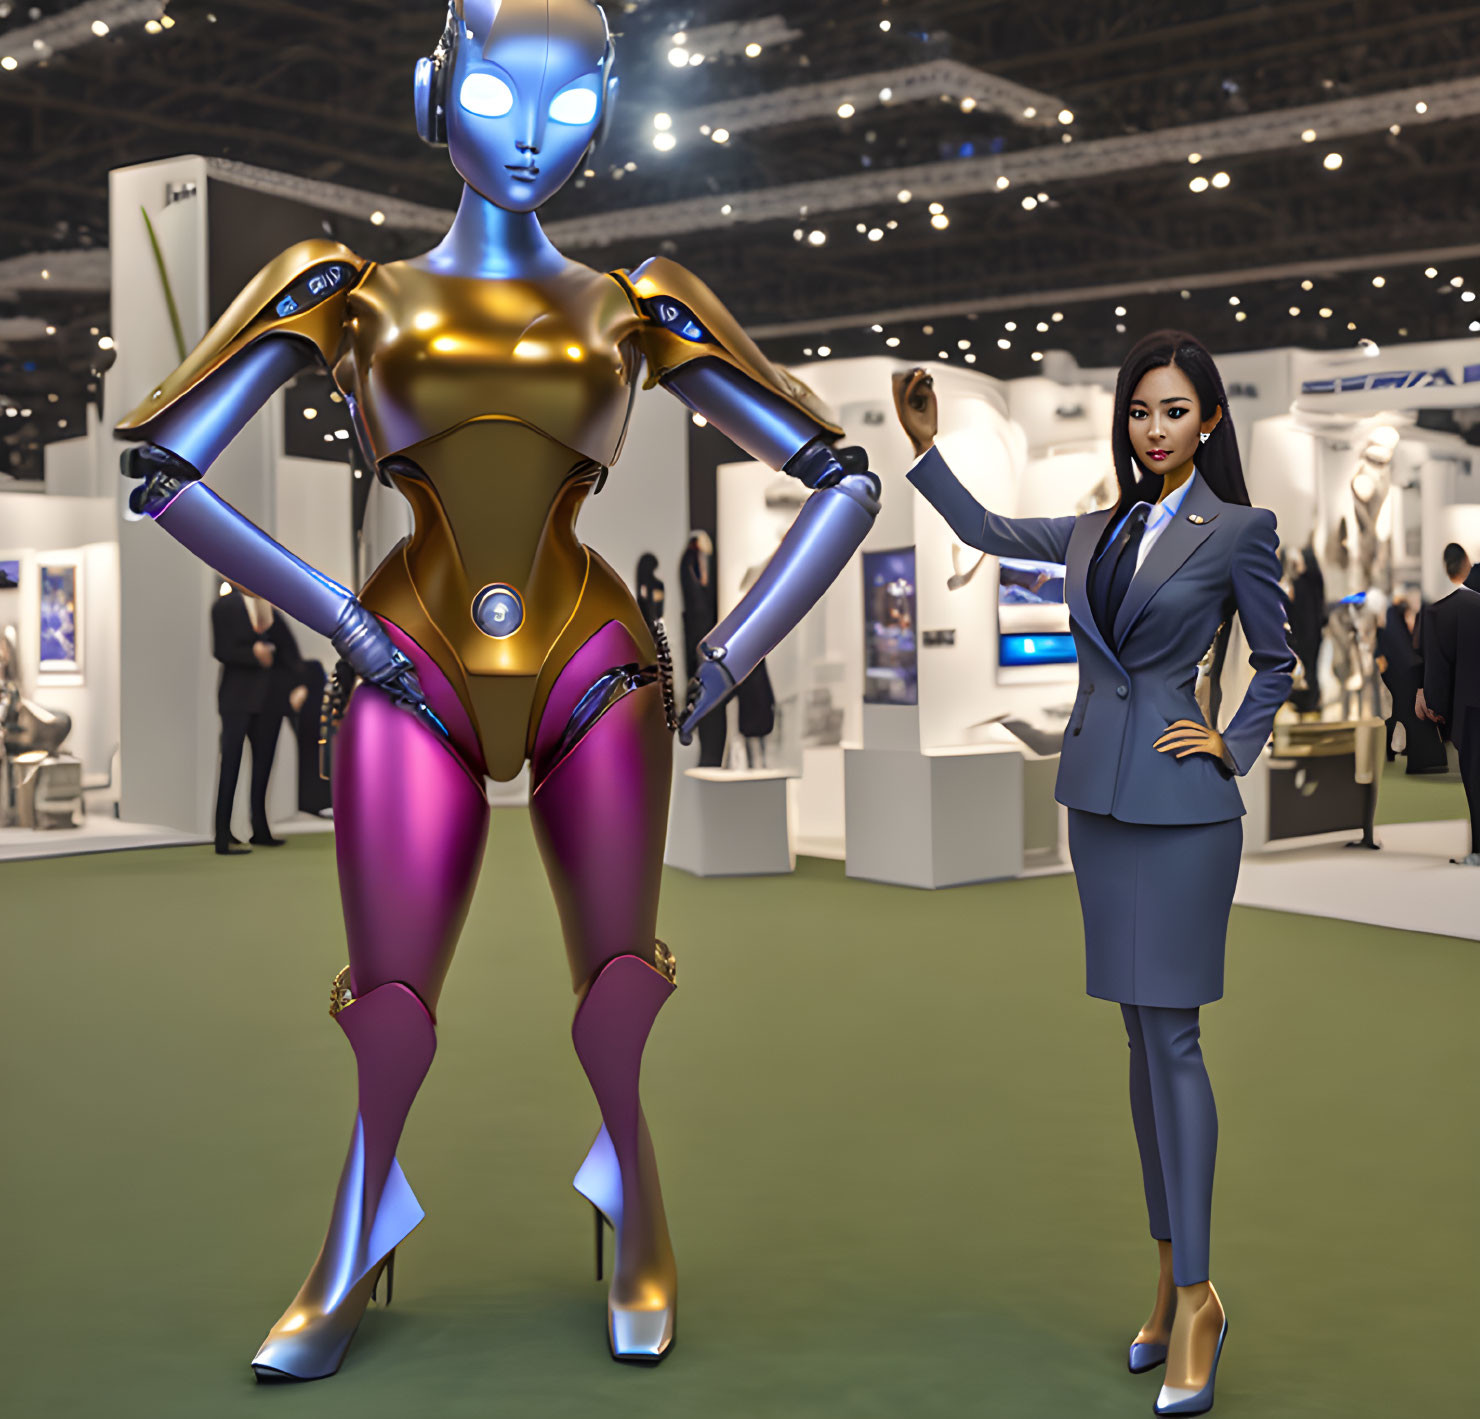 Gold and Purple Accented Humanoid Robot with Woman in Blue Business Suit at Tech Expo